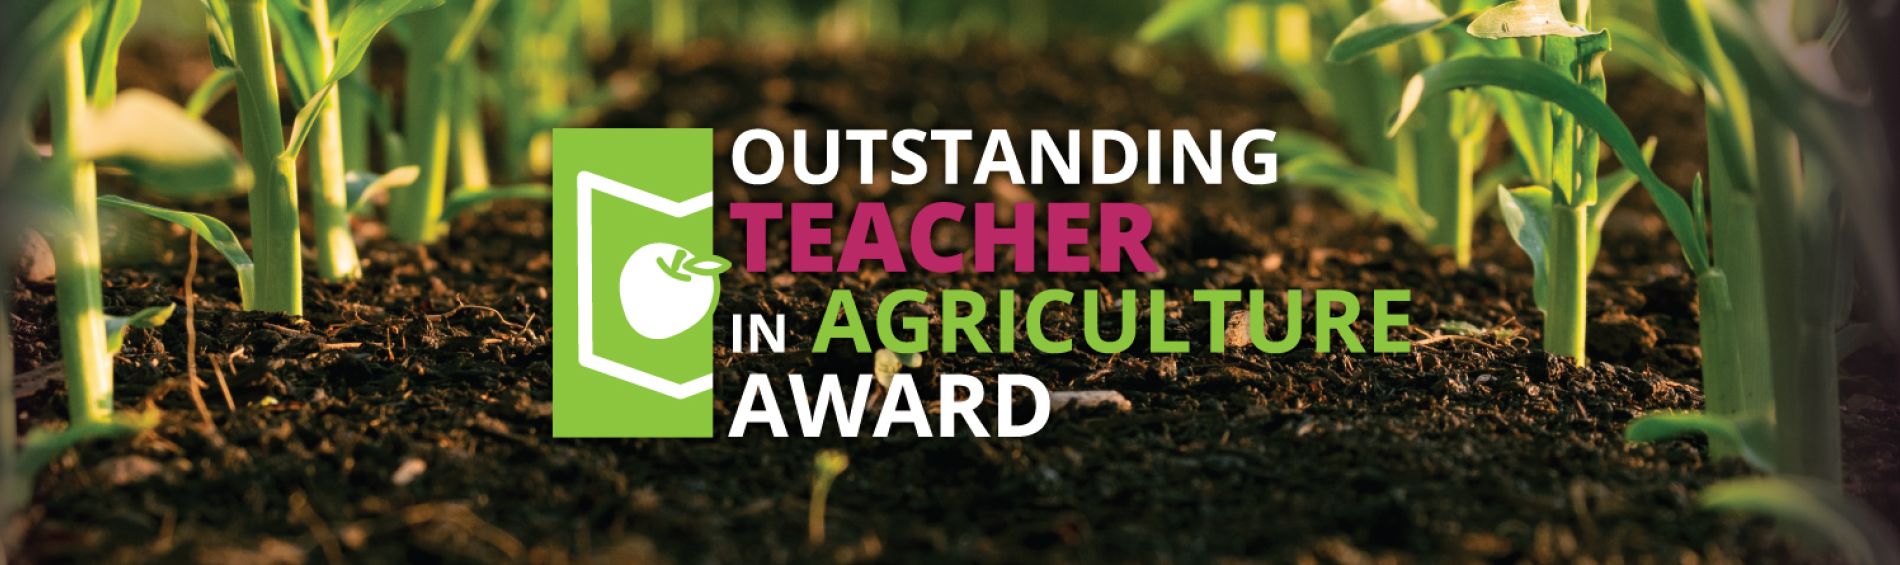 Outstanding Teacher in Agriculture Award